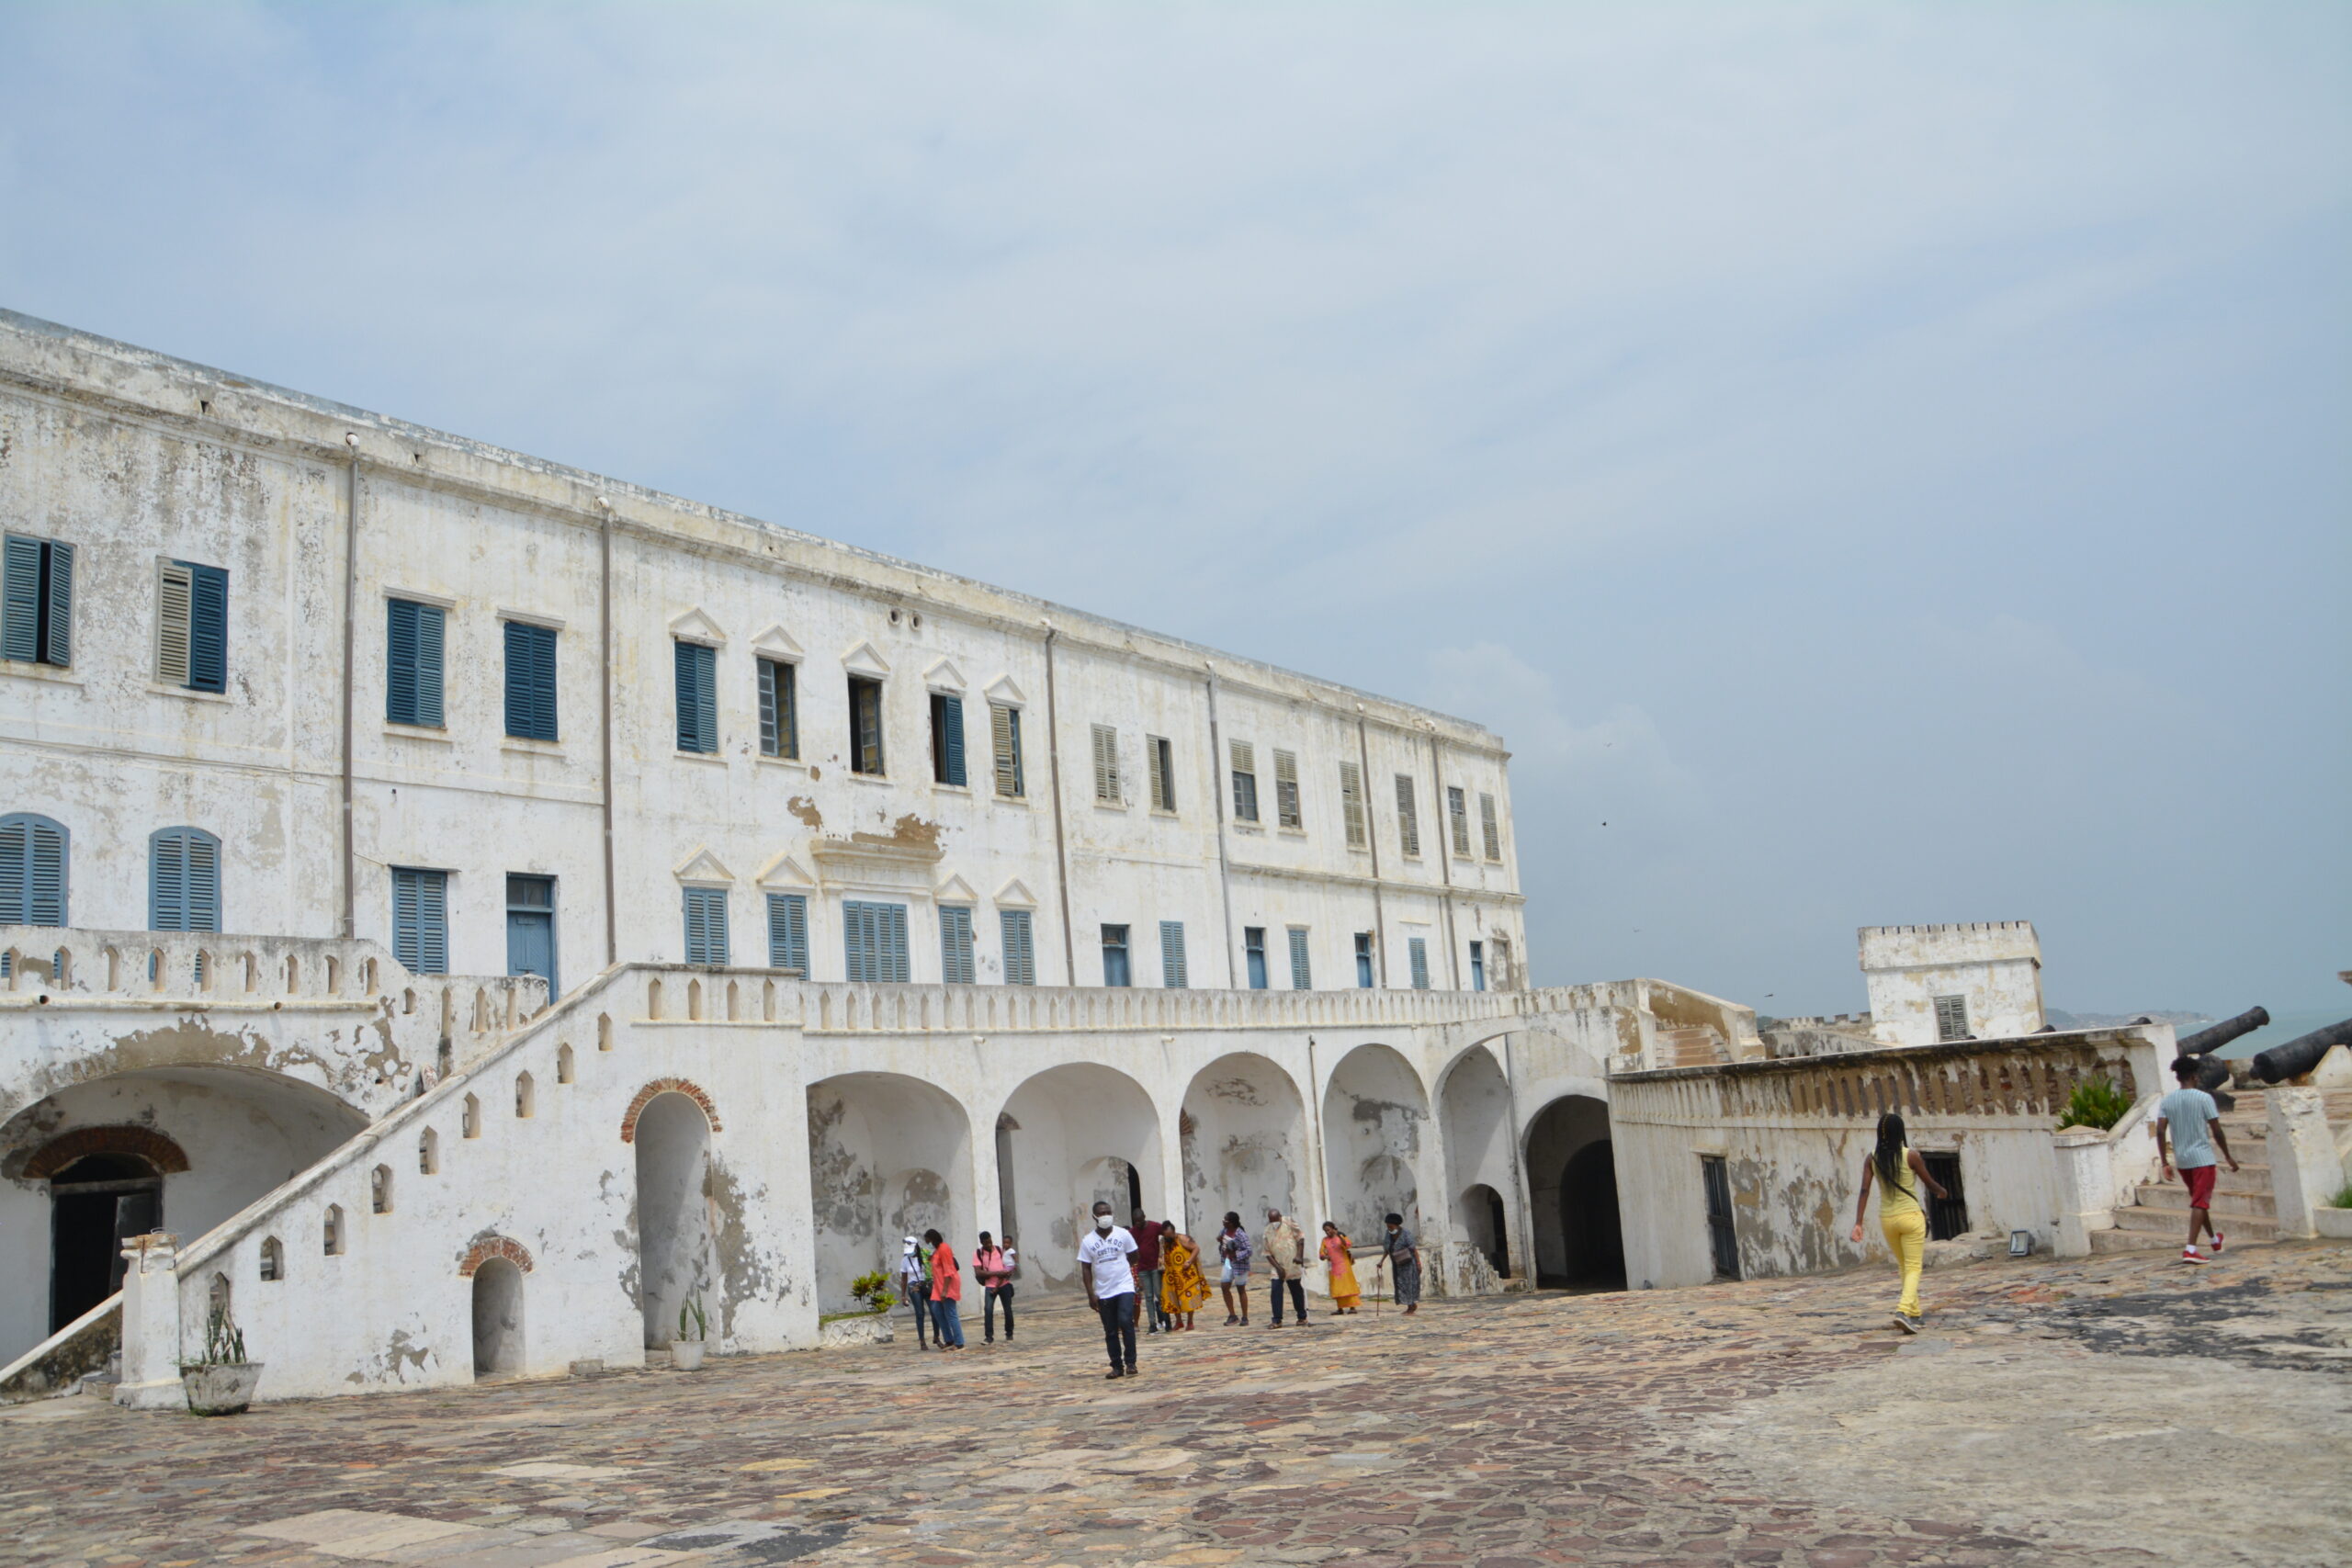 CAPE COAST CASTLE in Ghana was the site of the British slave dungeons where Africans were held until transported in the Transatlantic slave trade.